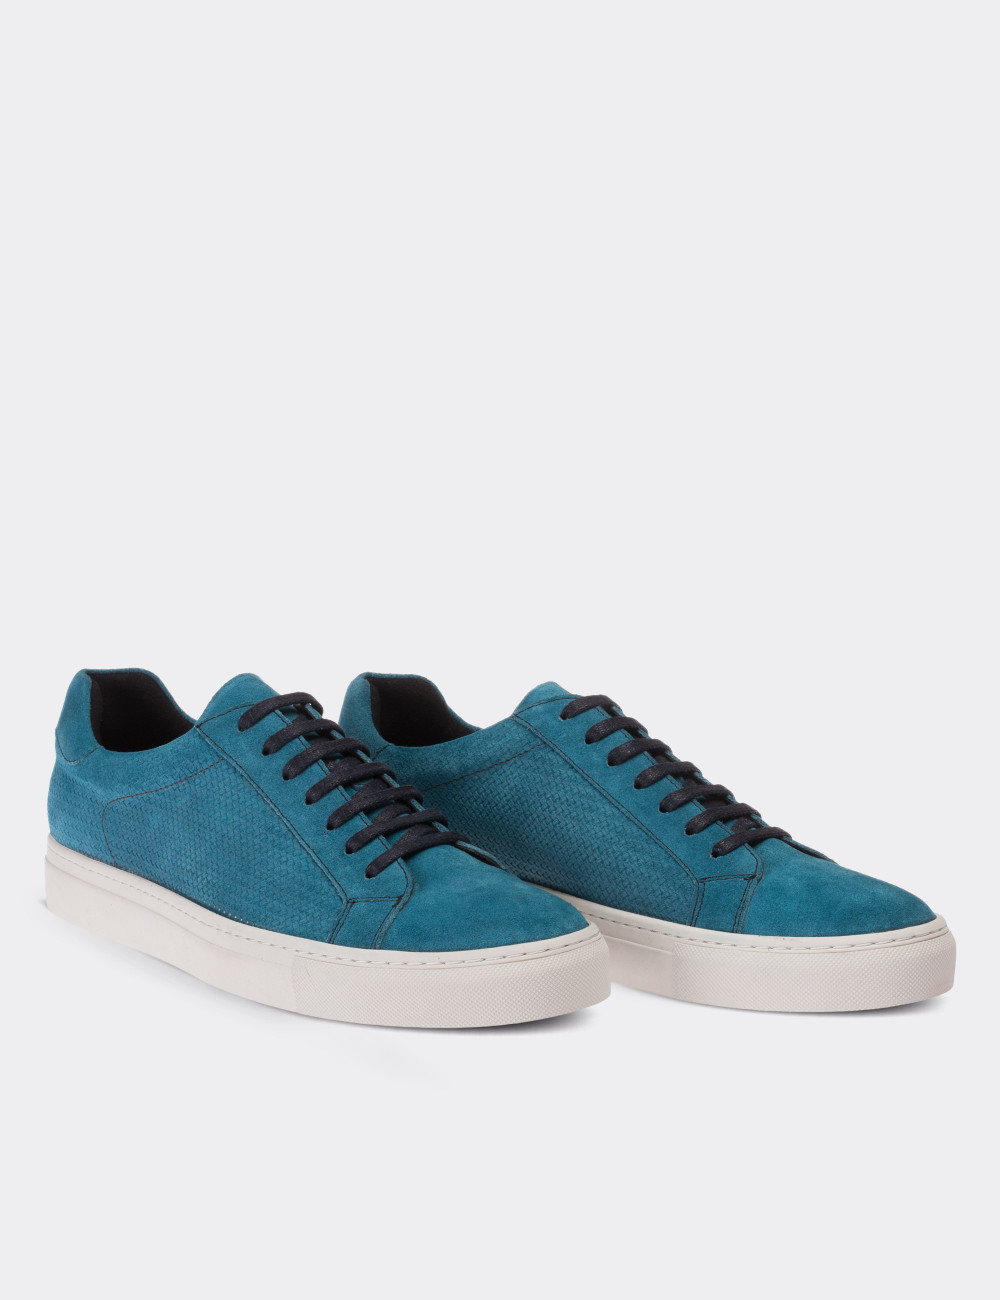 Blue Suede Leather Sneakers - 01681MMVIC01